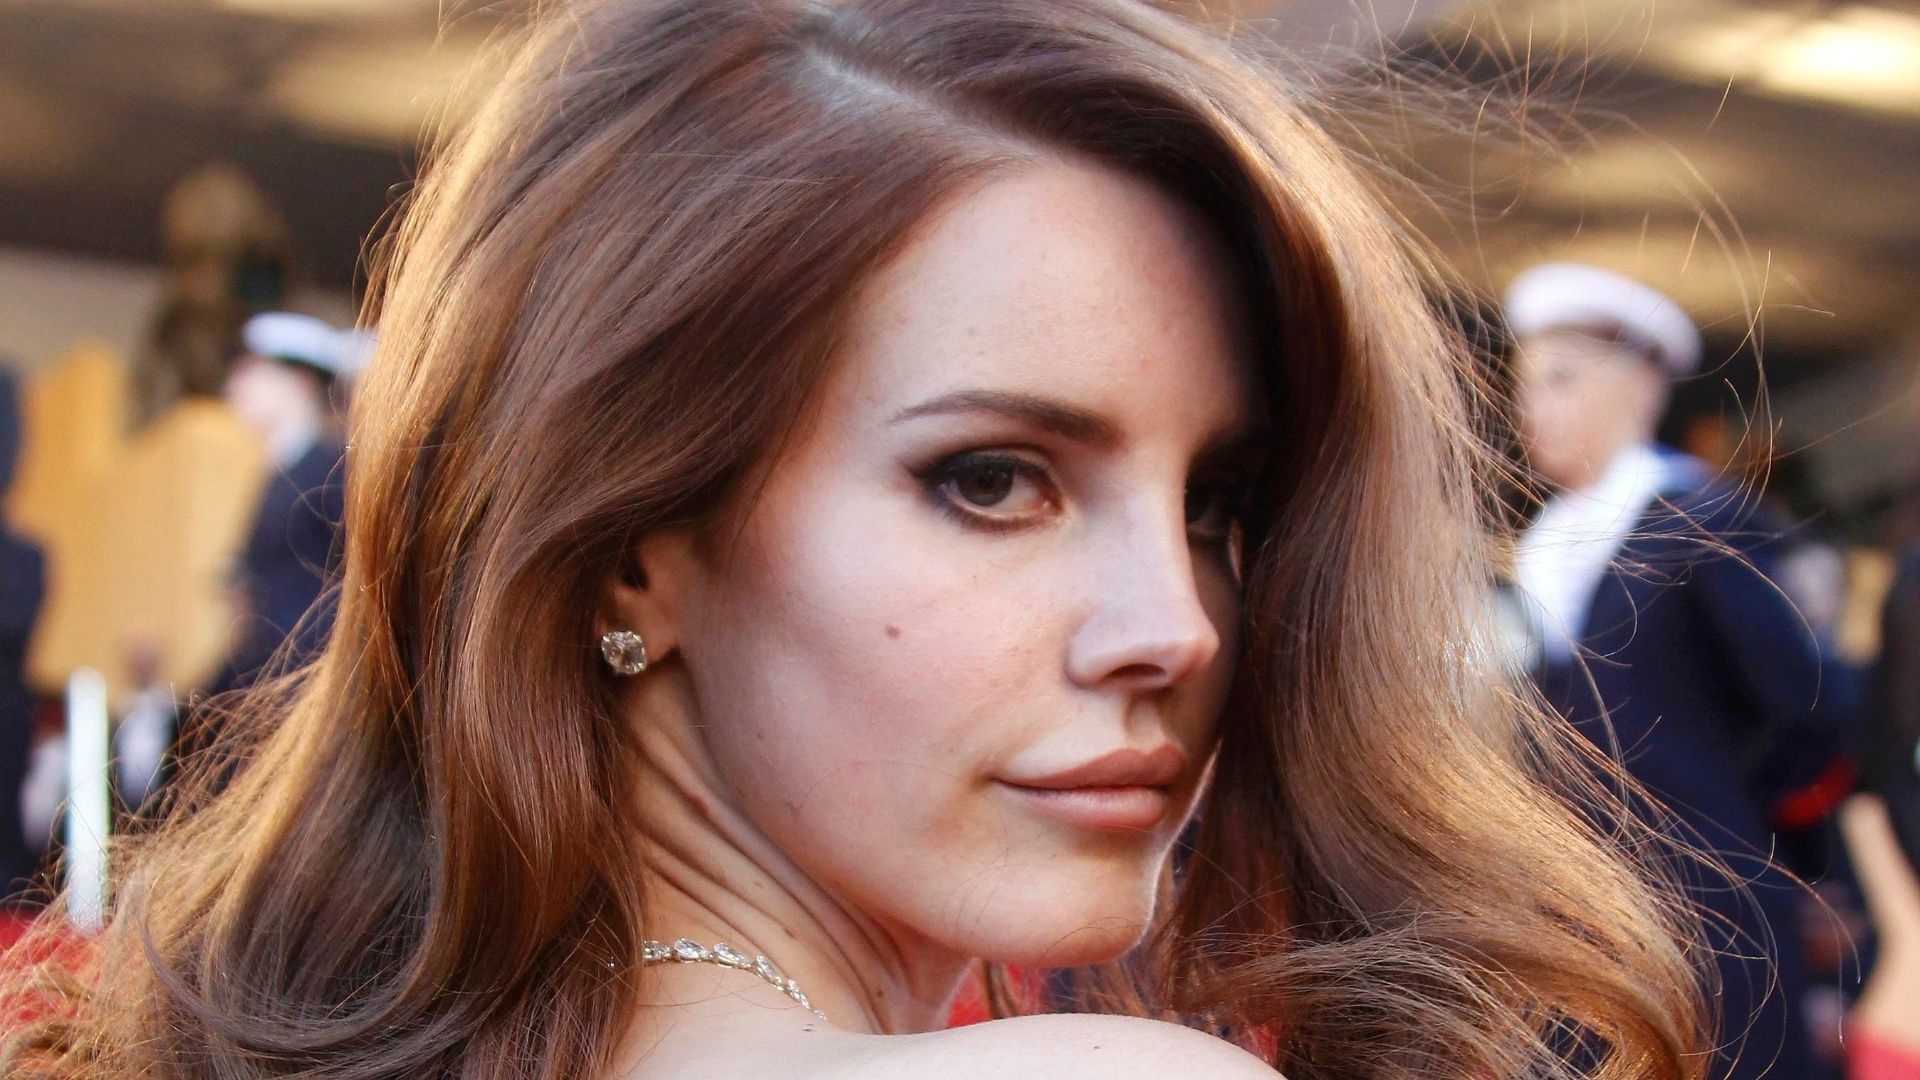 A woman with long hair and earrings - Lana Del Rey